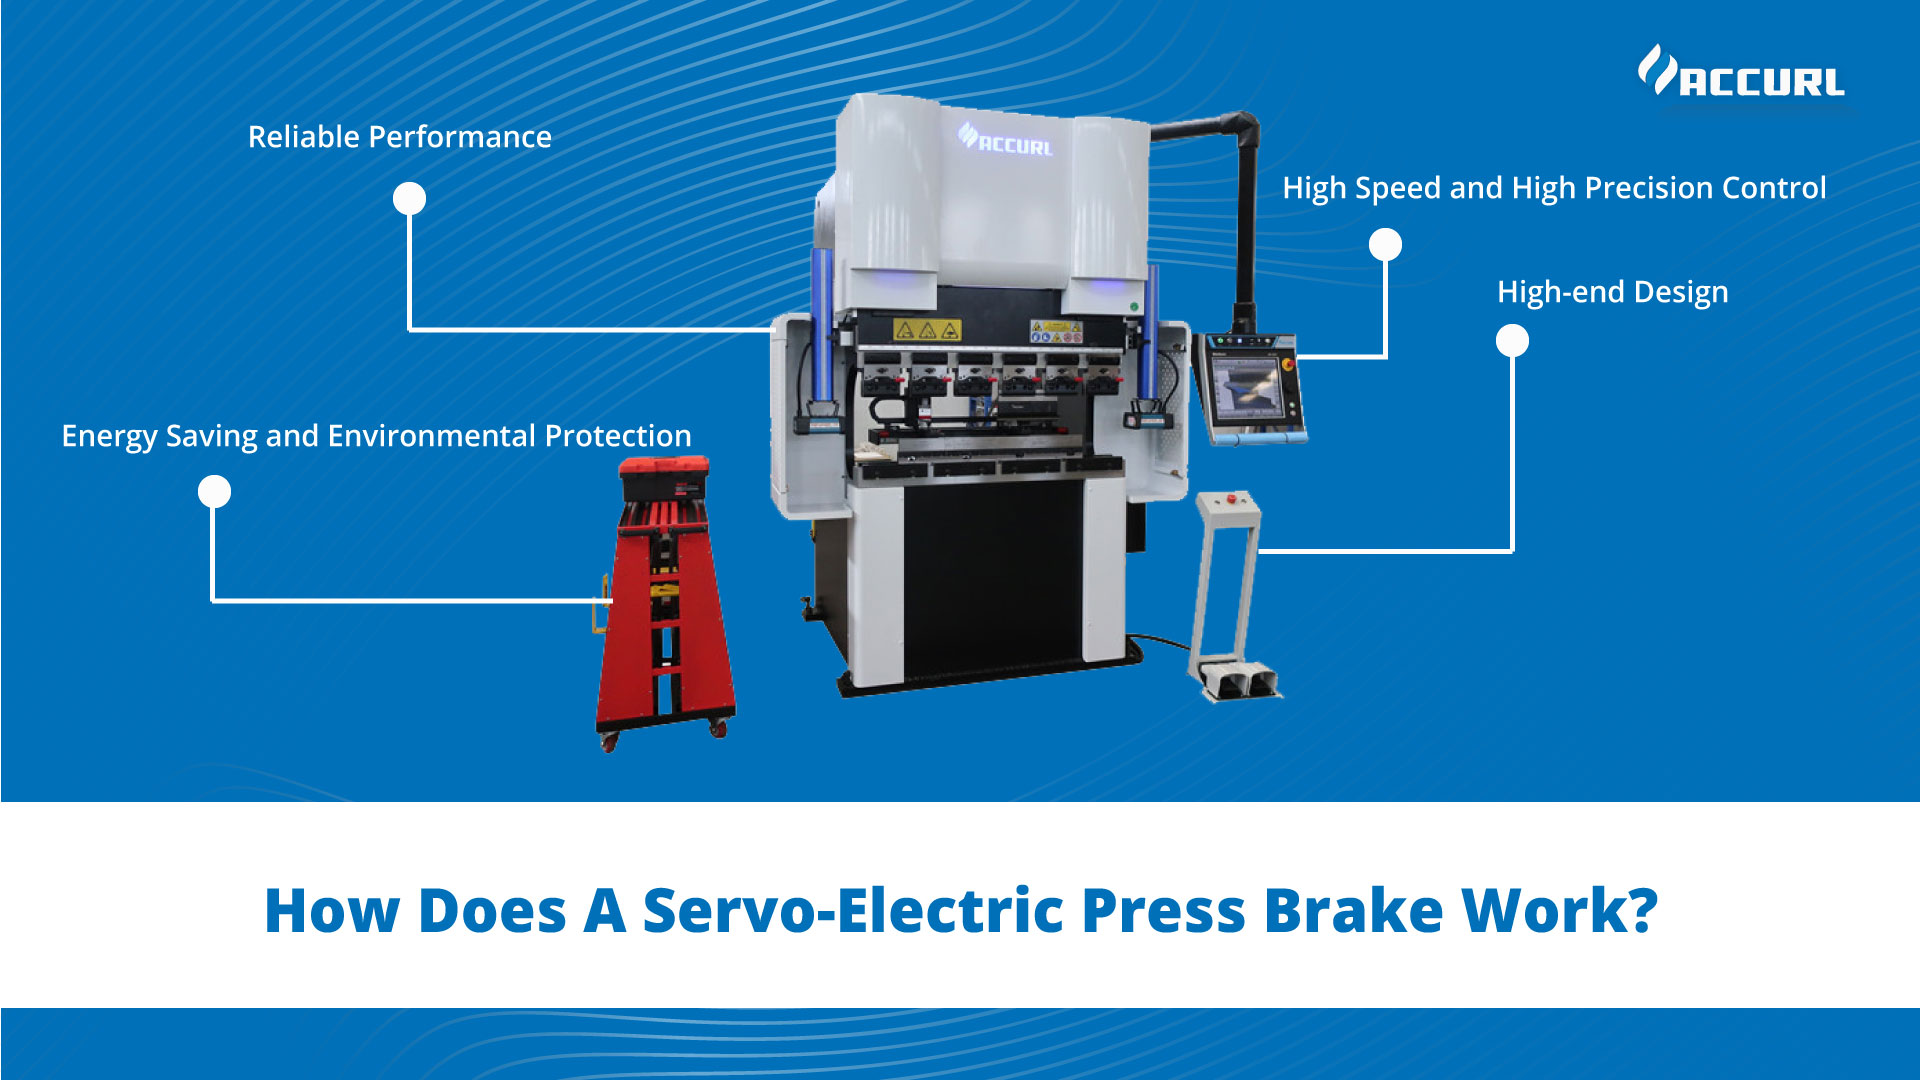 What is a Servo-Electric Press Brake and How Does it Work?